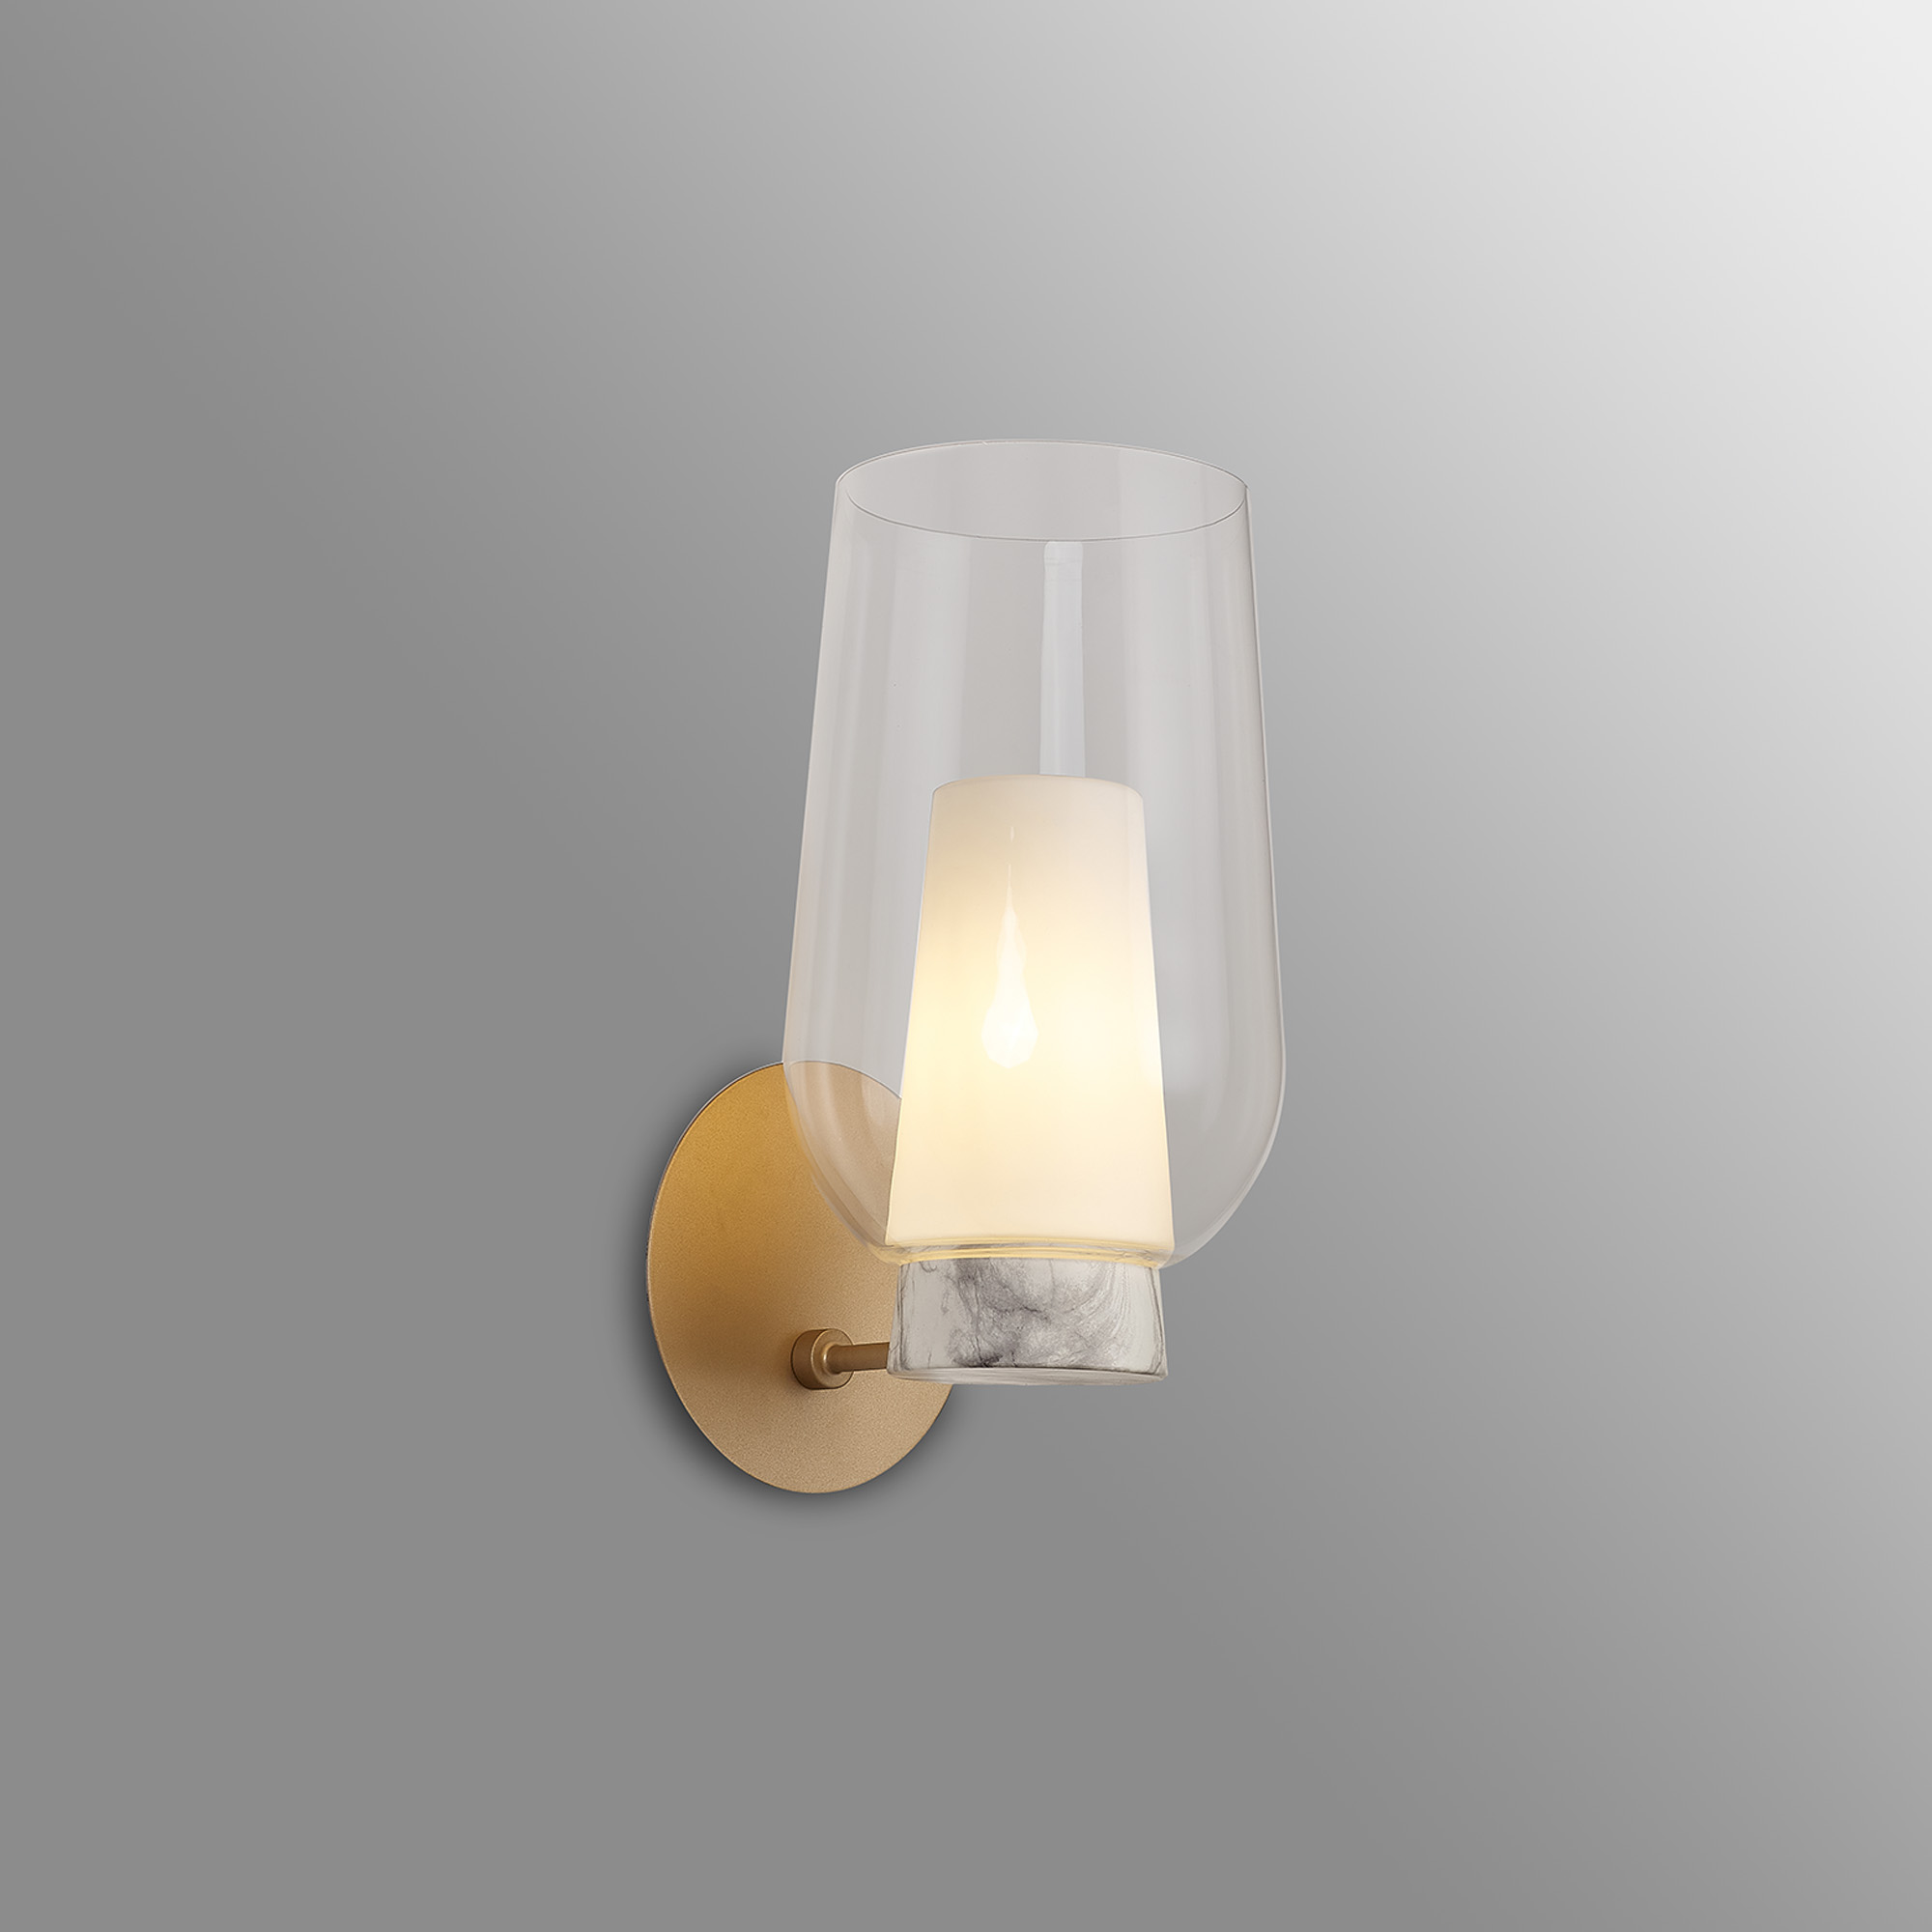 Nora Gold Wall Lights Mantra Armed Wall Lights